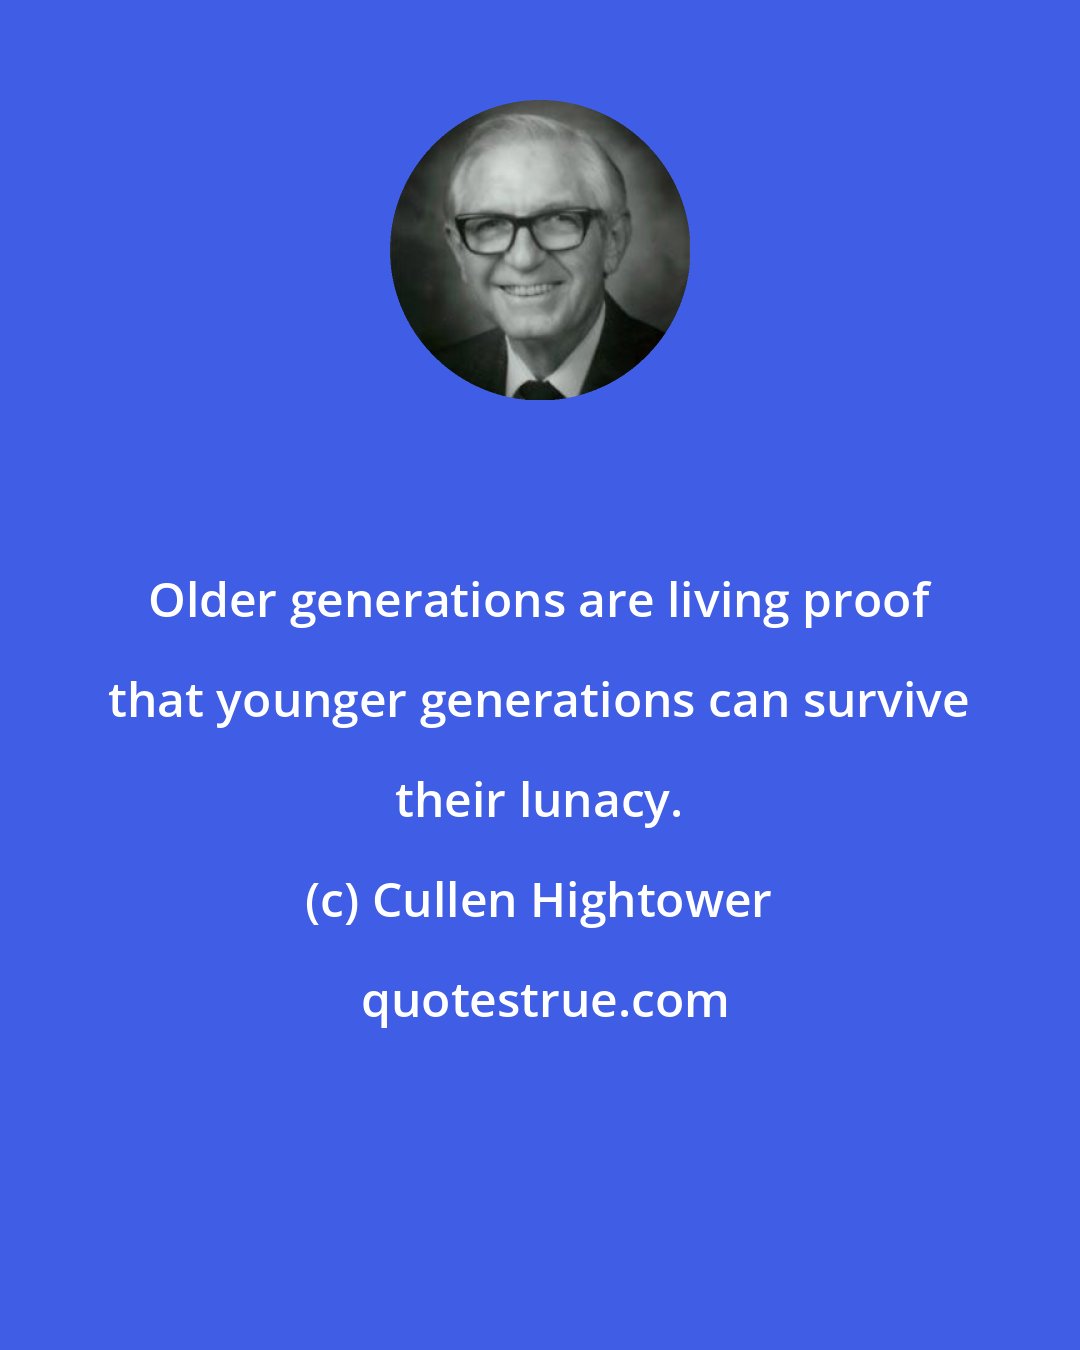 Cullen Hightower: Older generations are living proof that younger generations can survive their lunacy.